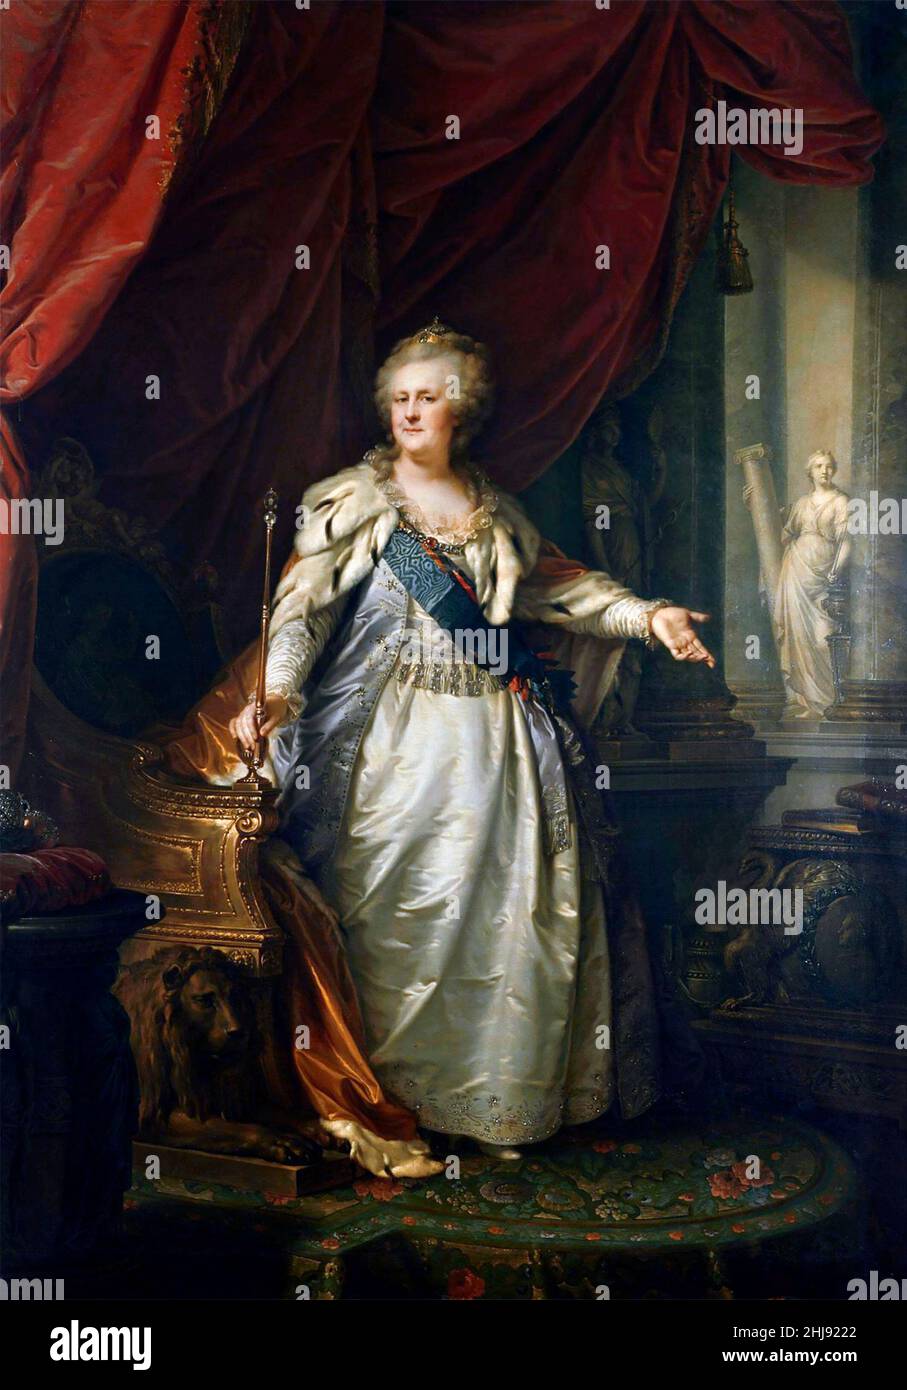 Catherine the Great. Portrait of Catherine II of Russia (1729-1796) byJ ohann Baptist Lampi the Elder (1751-1830), oil on canvas, 1793 Stock Photo